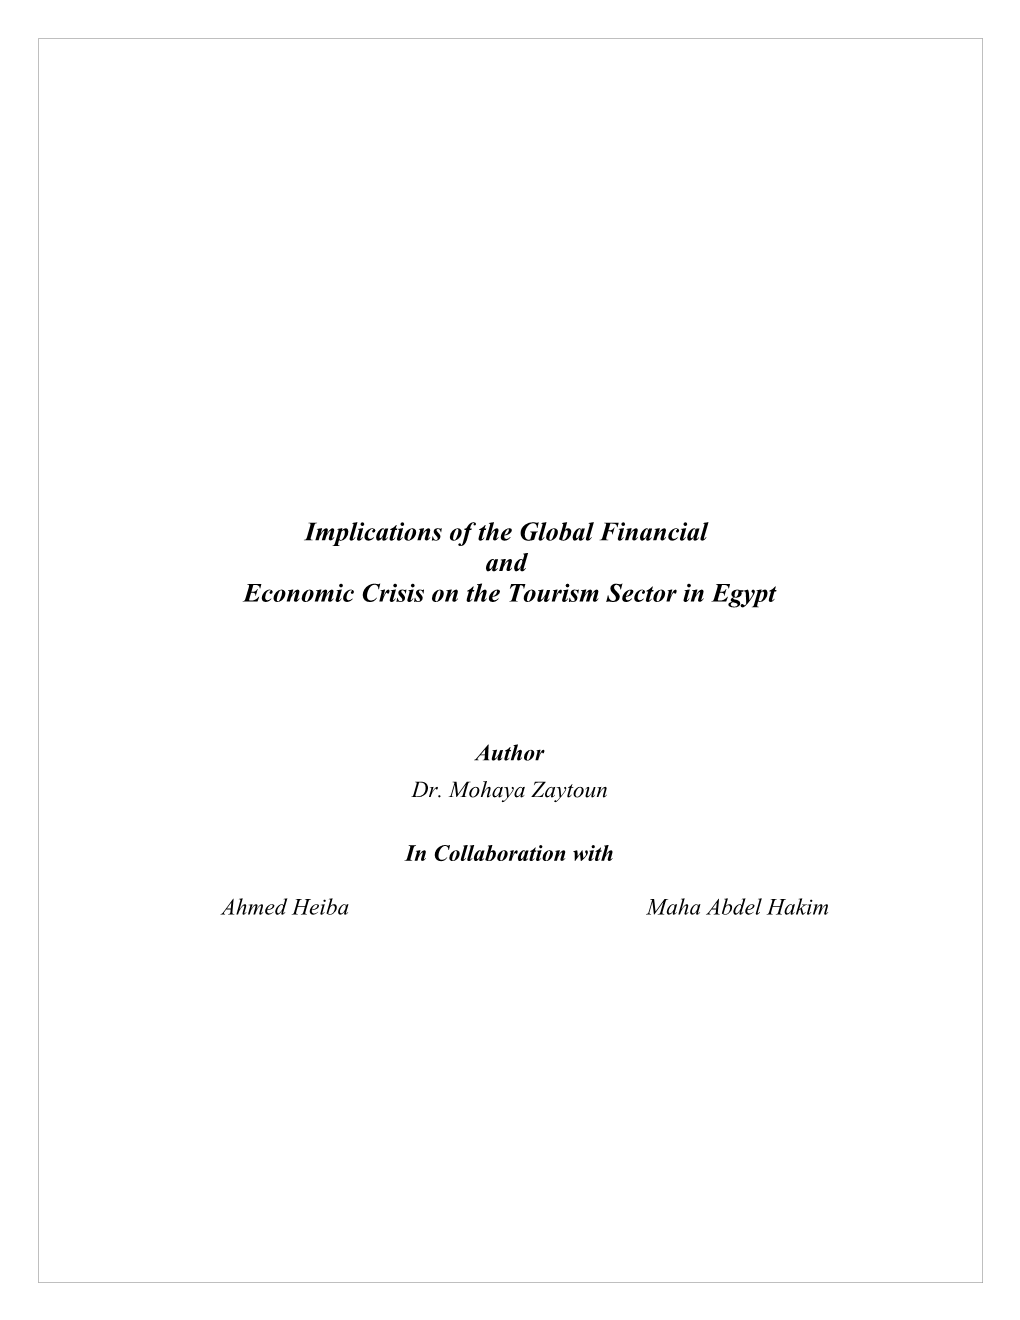 Implications of the Global Financial and Economic Crisis on the Tourism Sector in Egypt